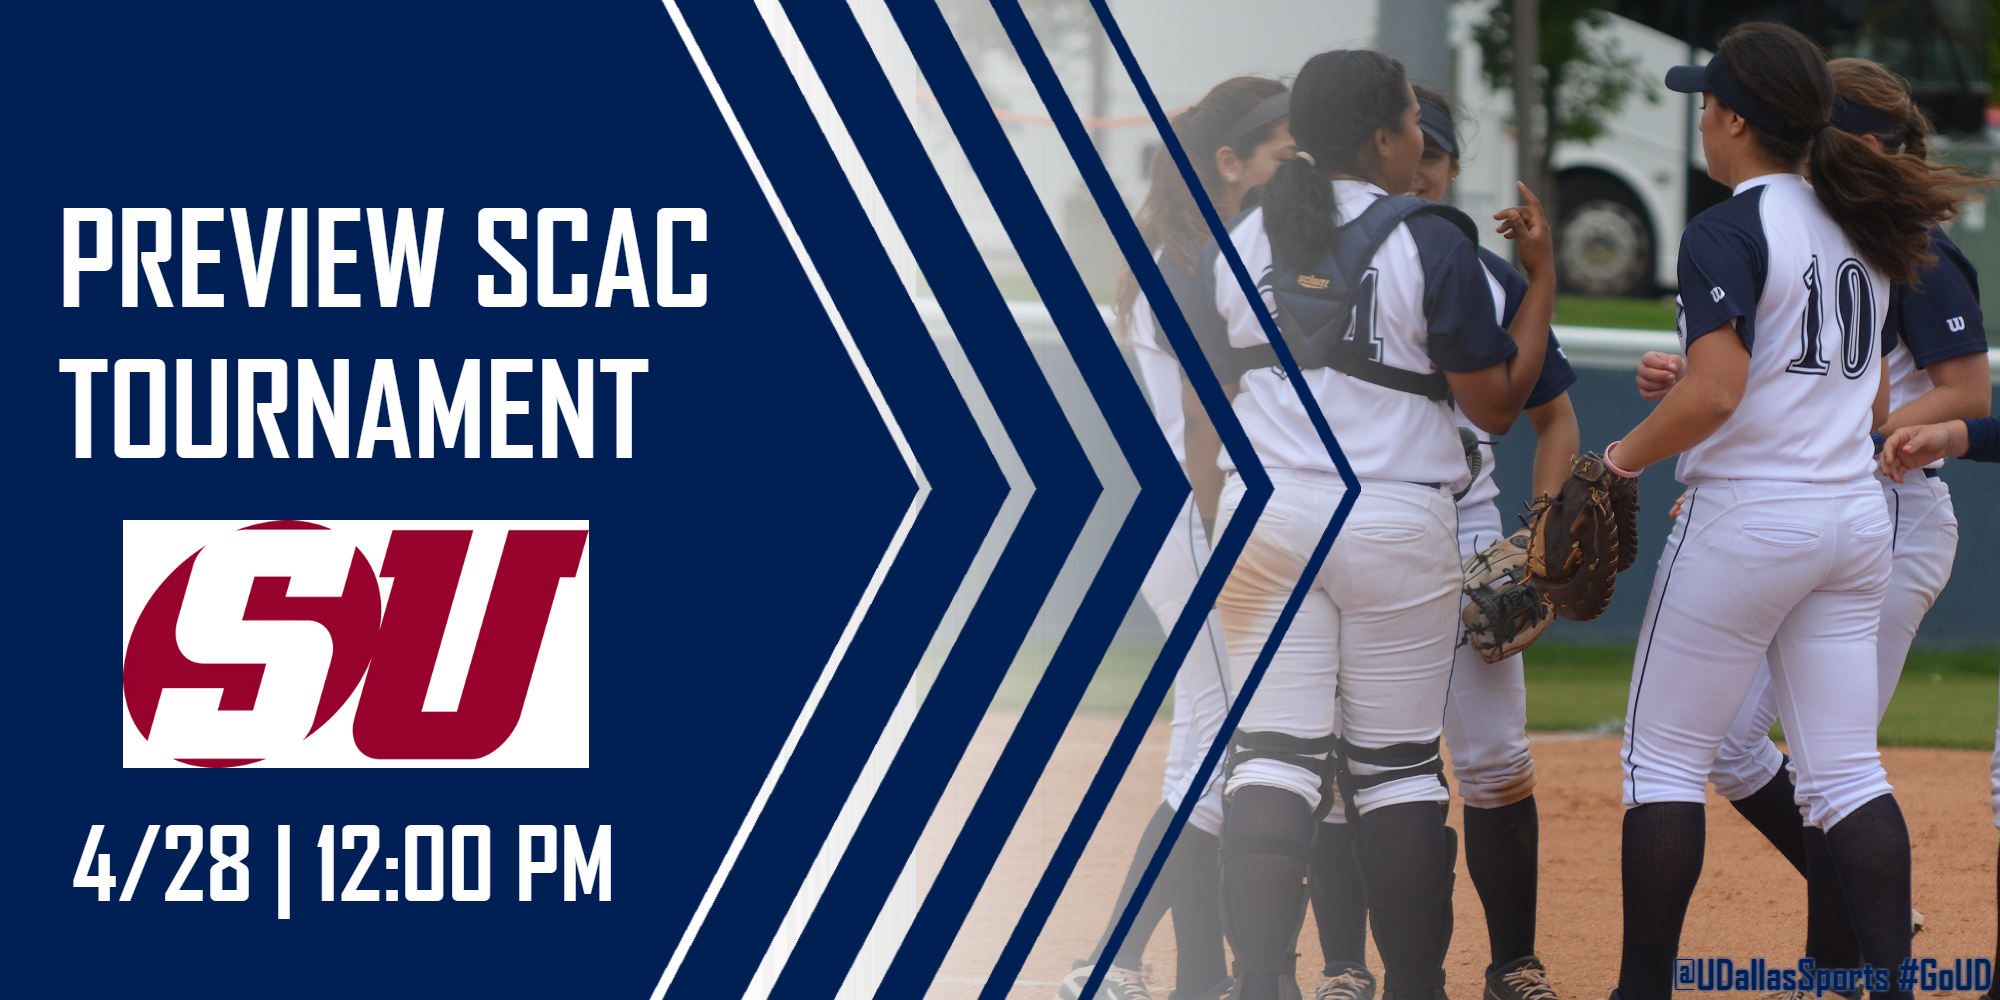 Crusaders begin SCAC Tournament on Friday.